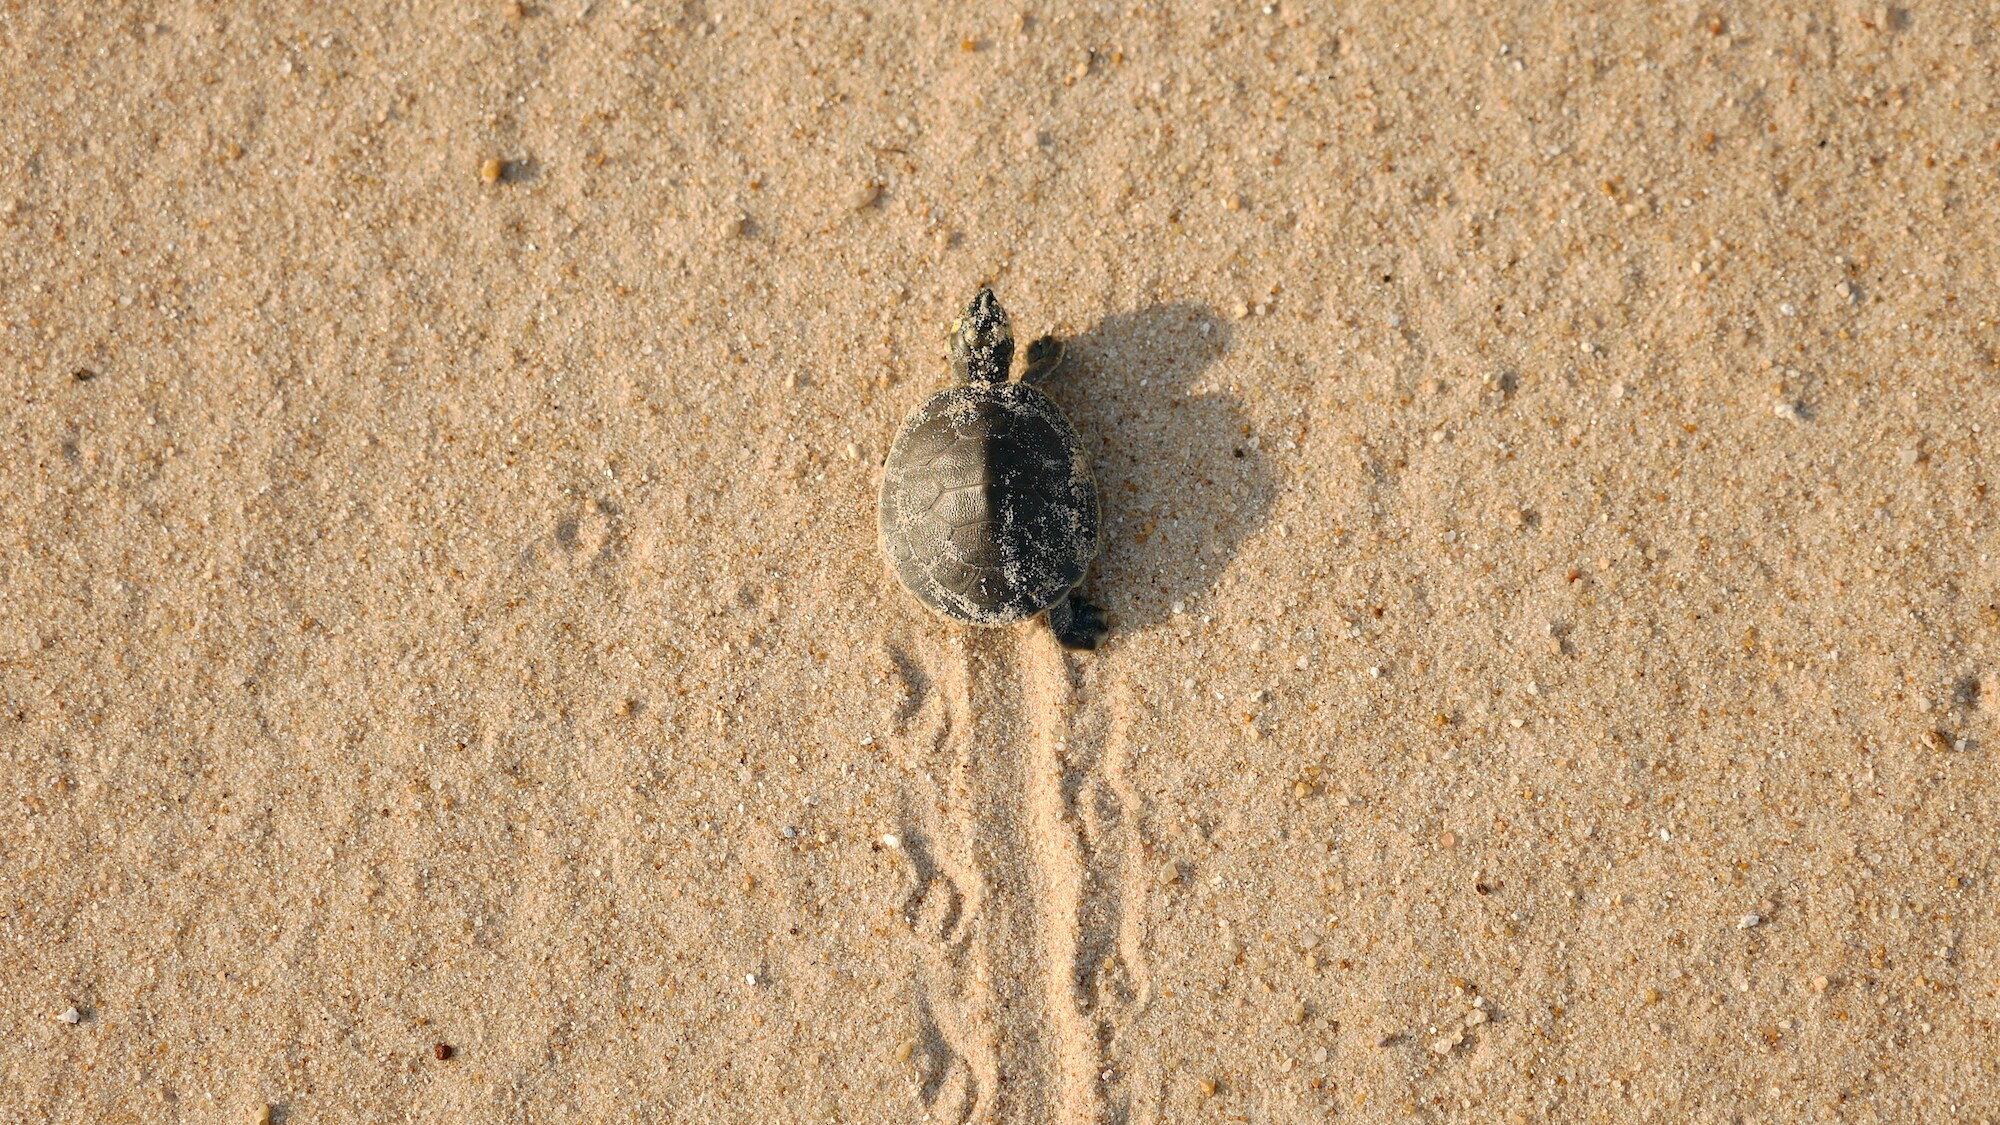 A hatchling on a beach. (National Geographic for Disney+/Lillian Todd-Jones)